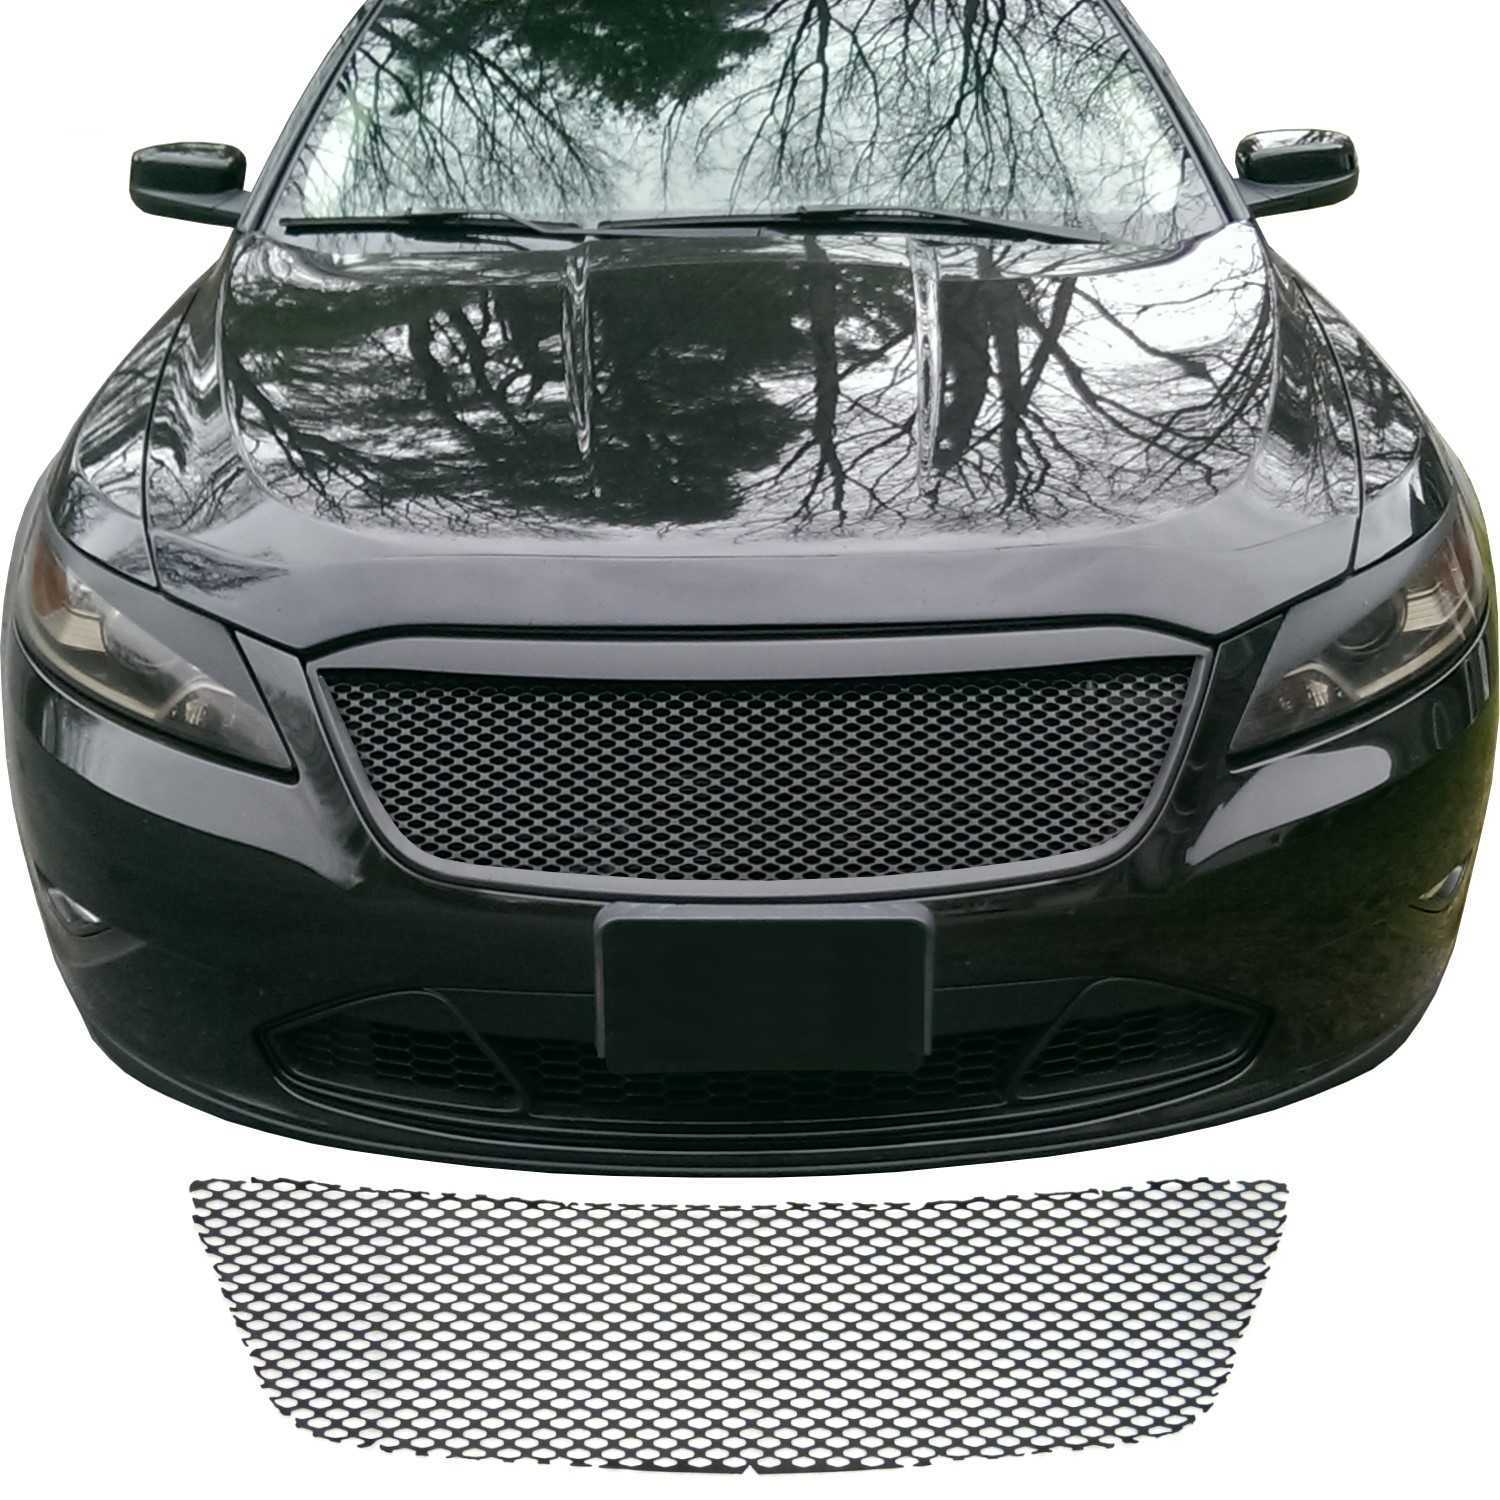 2010 Taurus SHO mesh grill Complete Install 